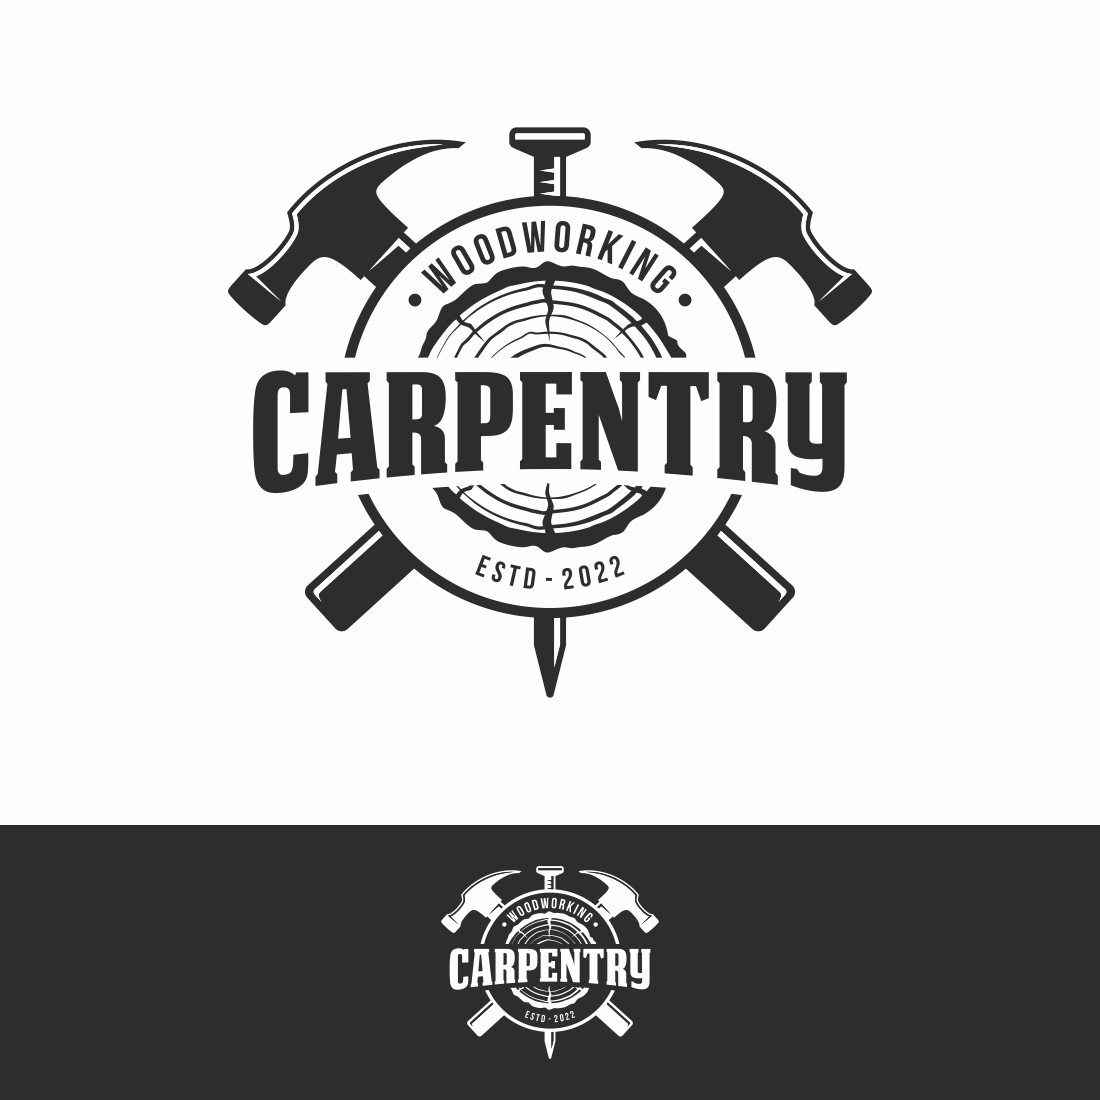 Carpentry Vintage Logo Design Template – Only $6 preview image.